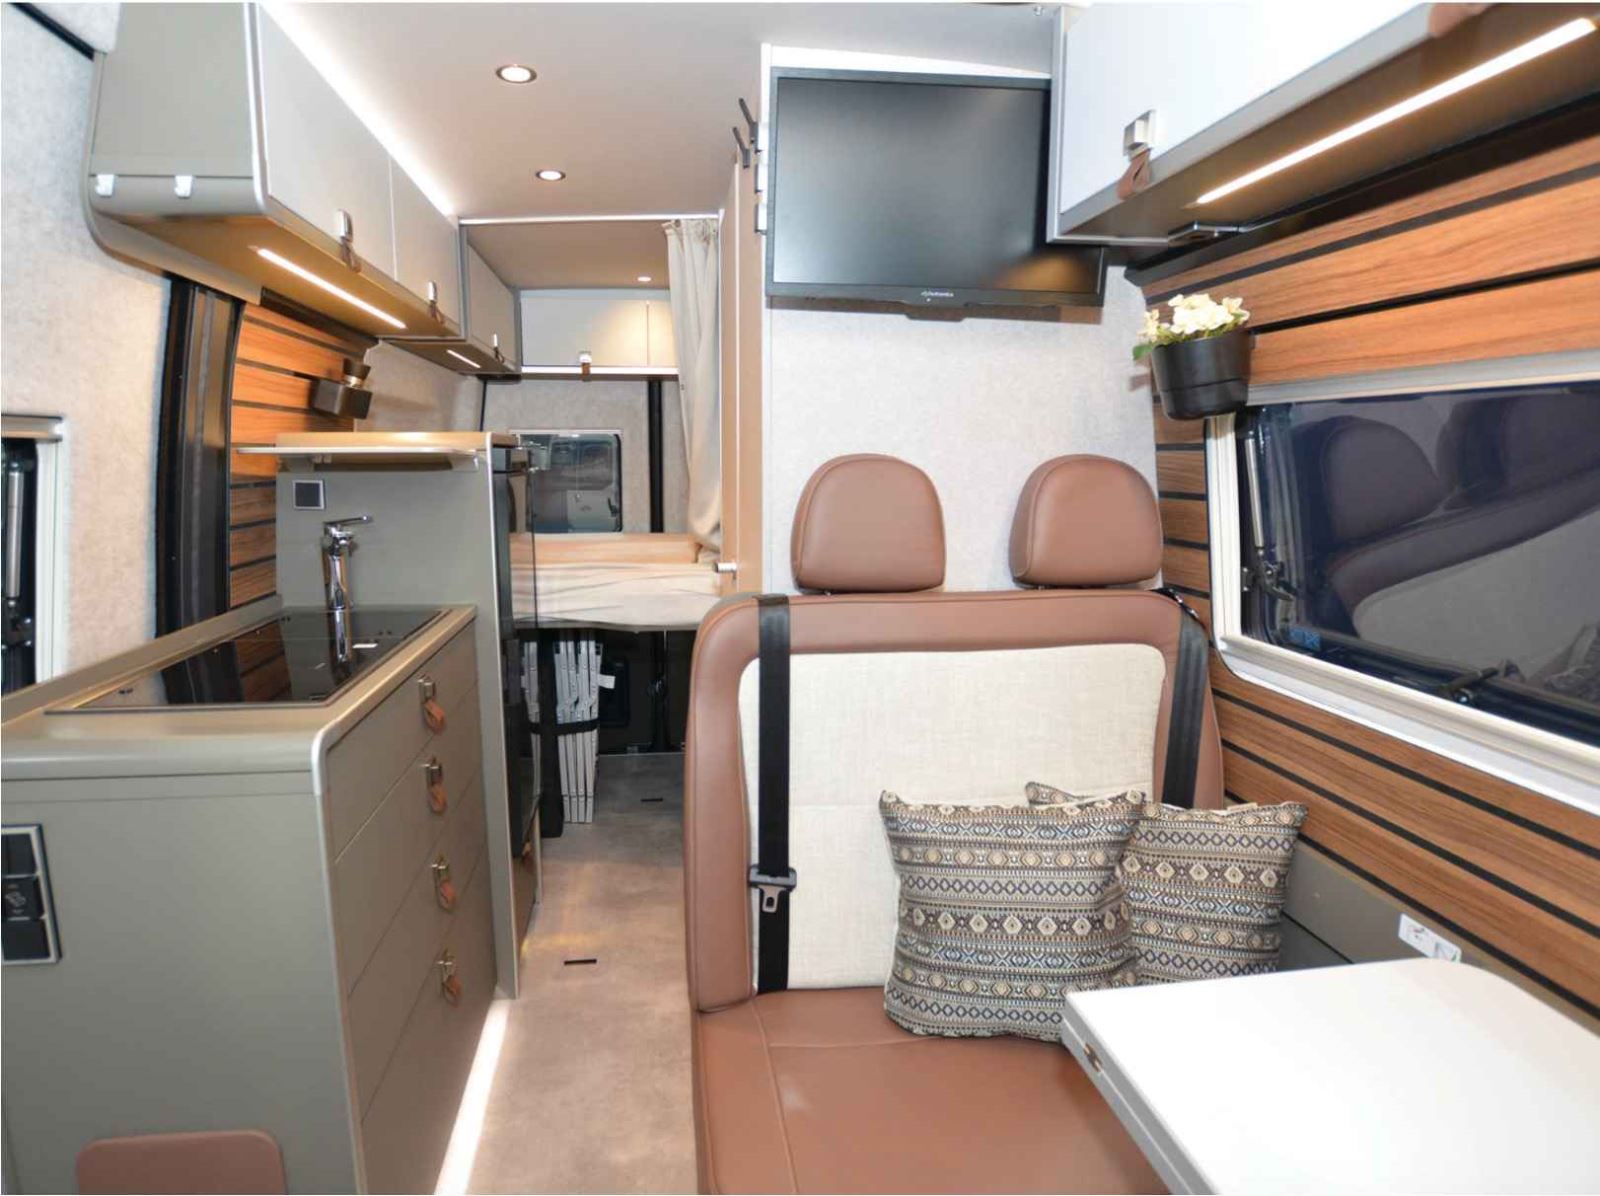 Inside the Hymer Grand Canyon S